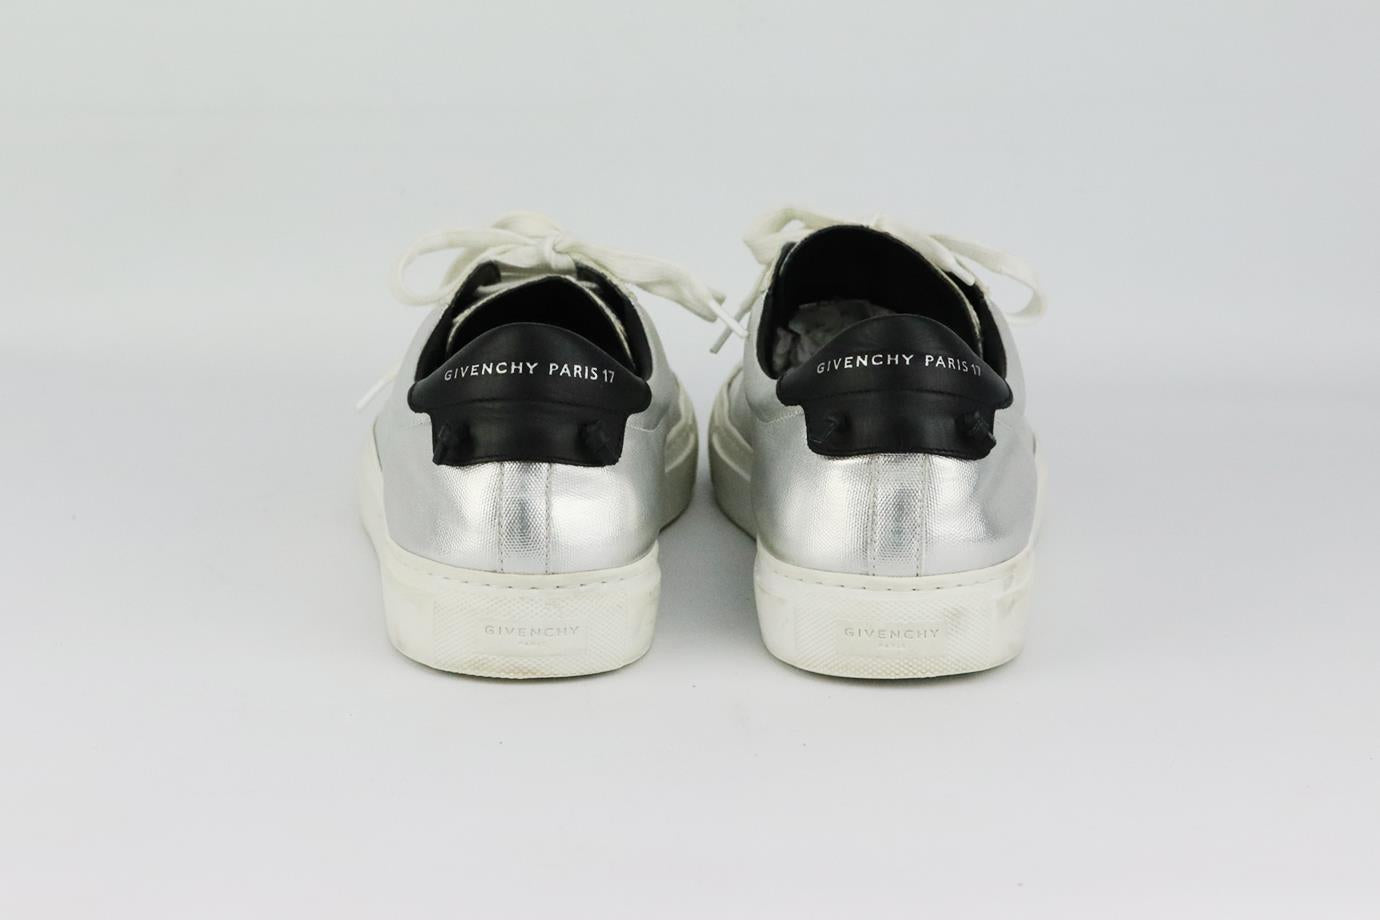 GIVENCHY MEN'S COATED CANVAS SNEAKERS EU 42 UK 8 US 9